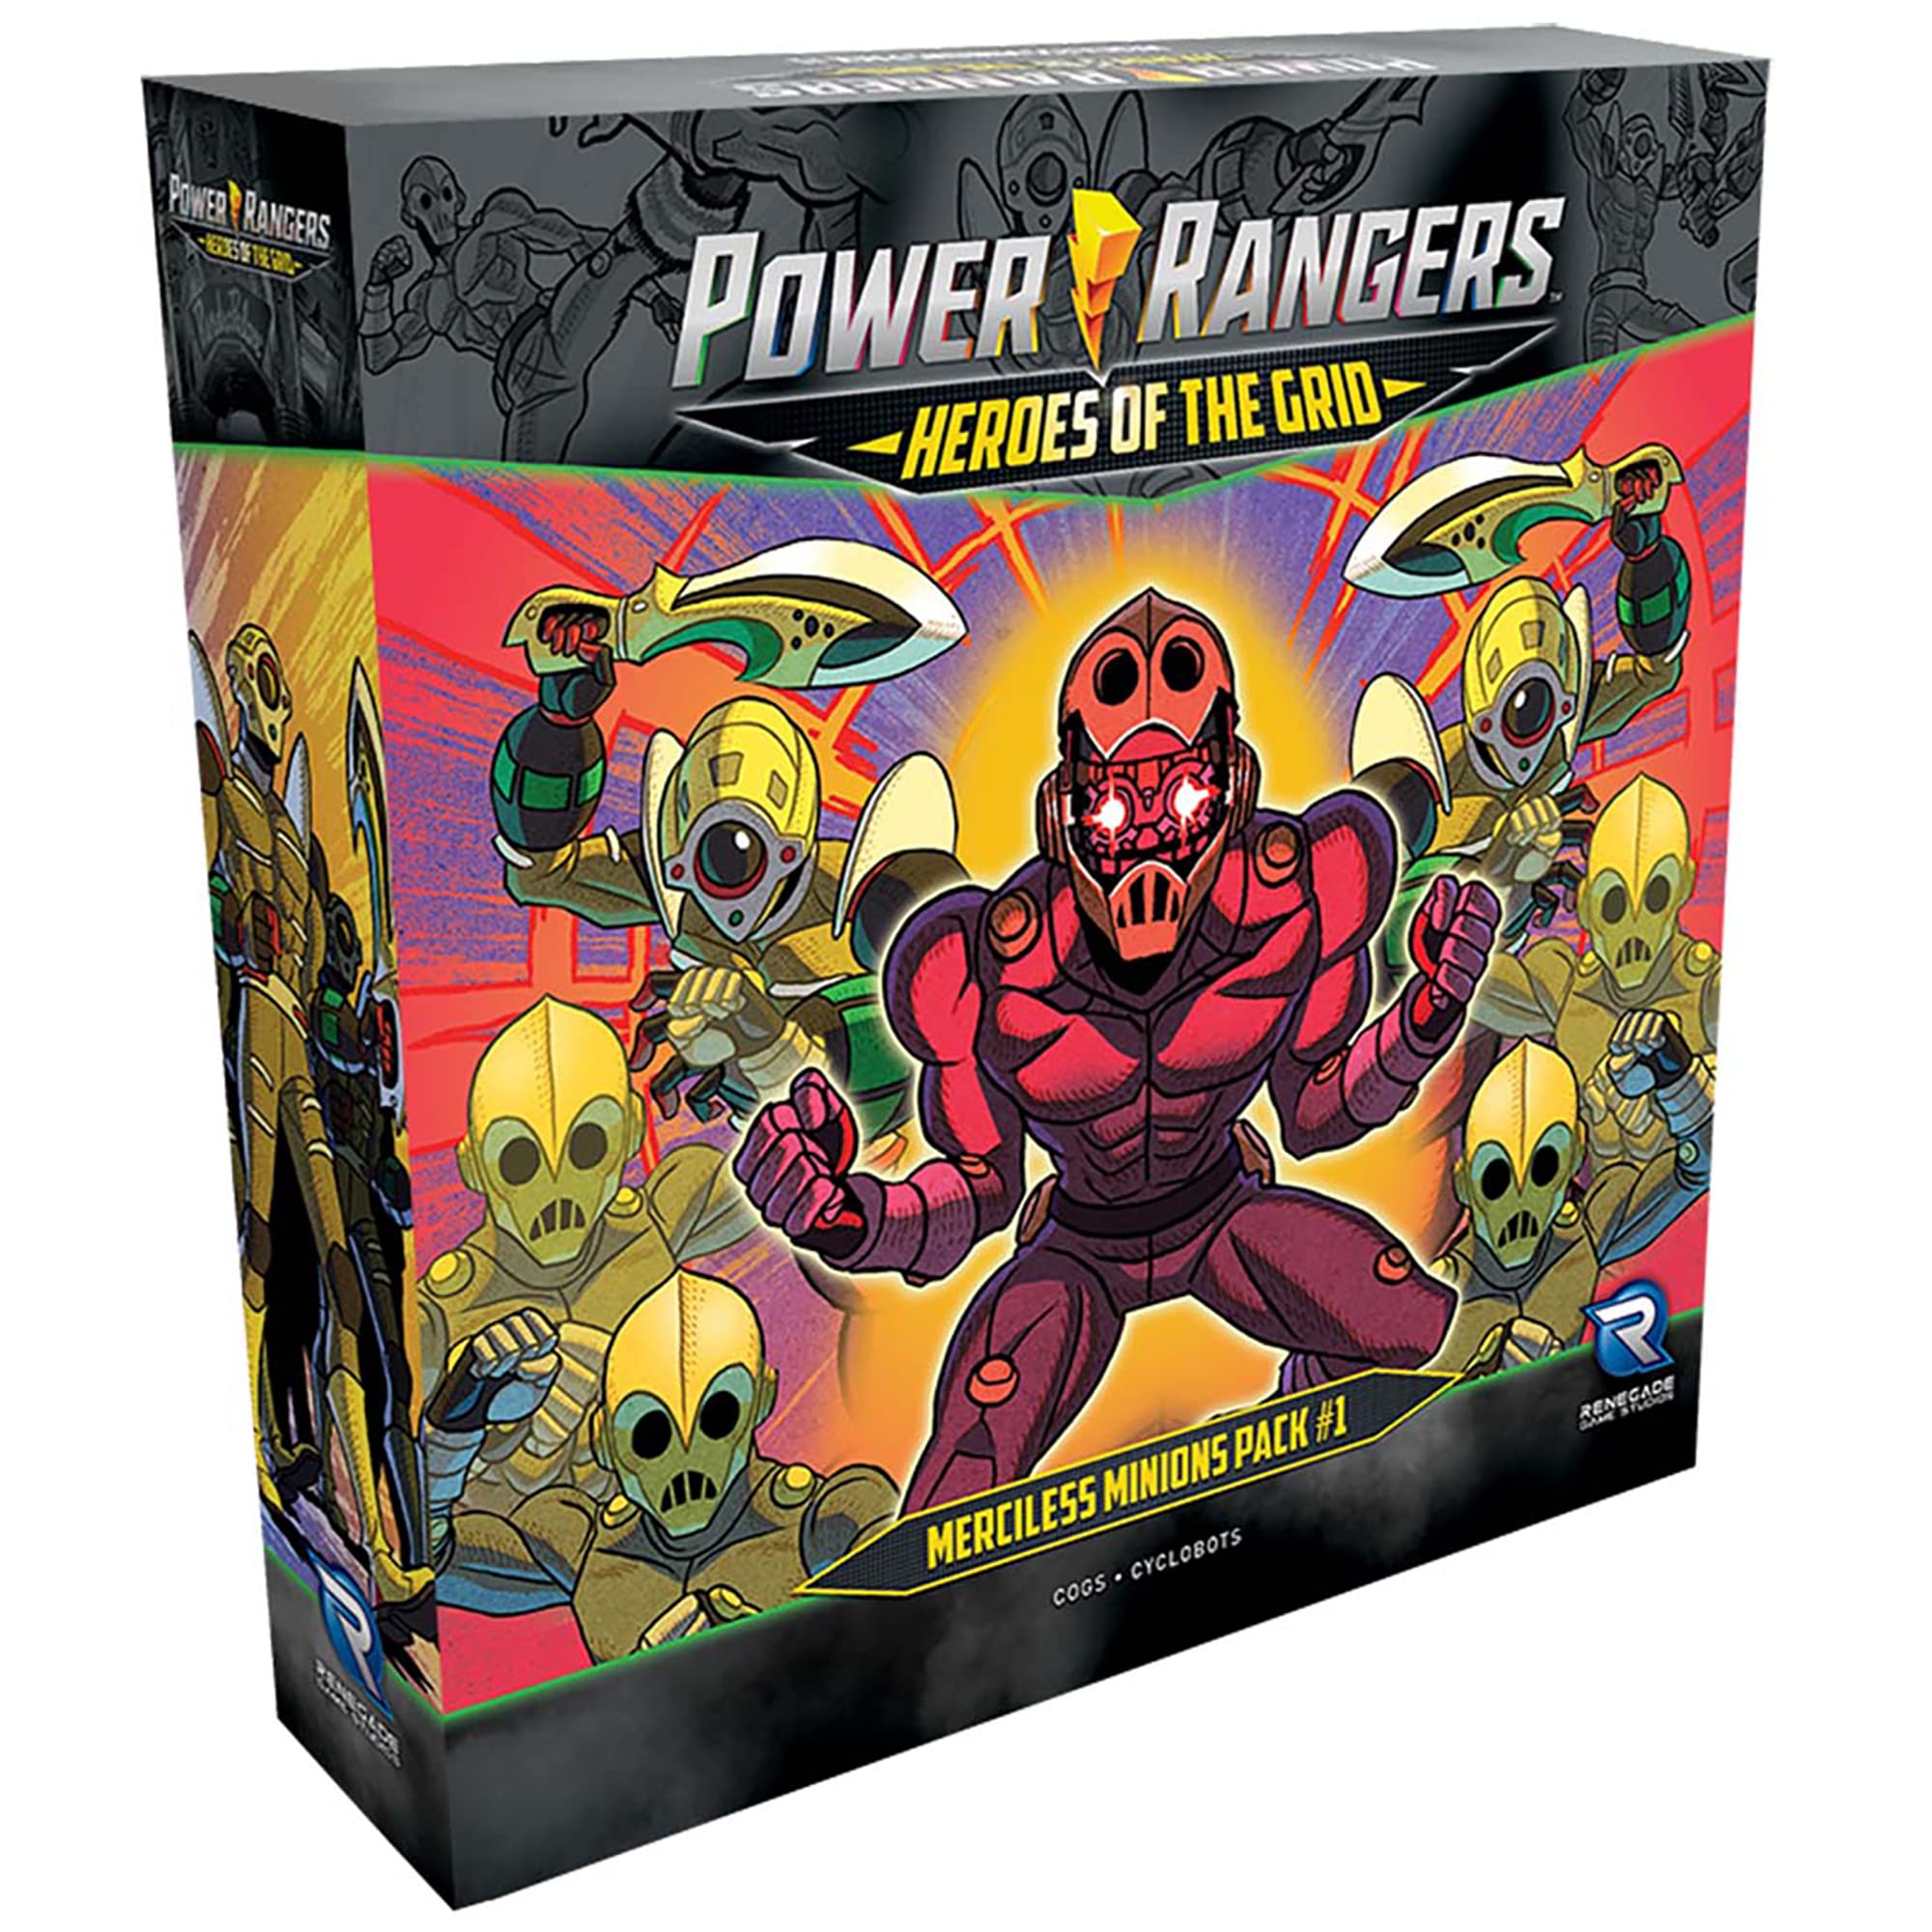 Power Rangers Heroes of The Grid: Merciless Minions Pack #1 - Expansion to Heroes of The Grid. 2-5 Players, Ages 14+, 45-60 Min Game Play